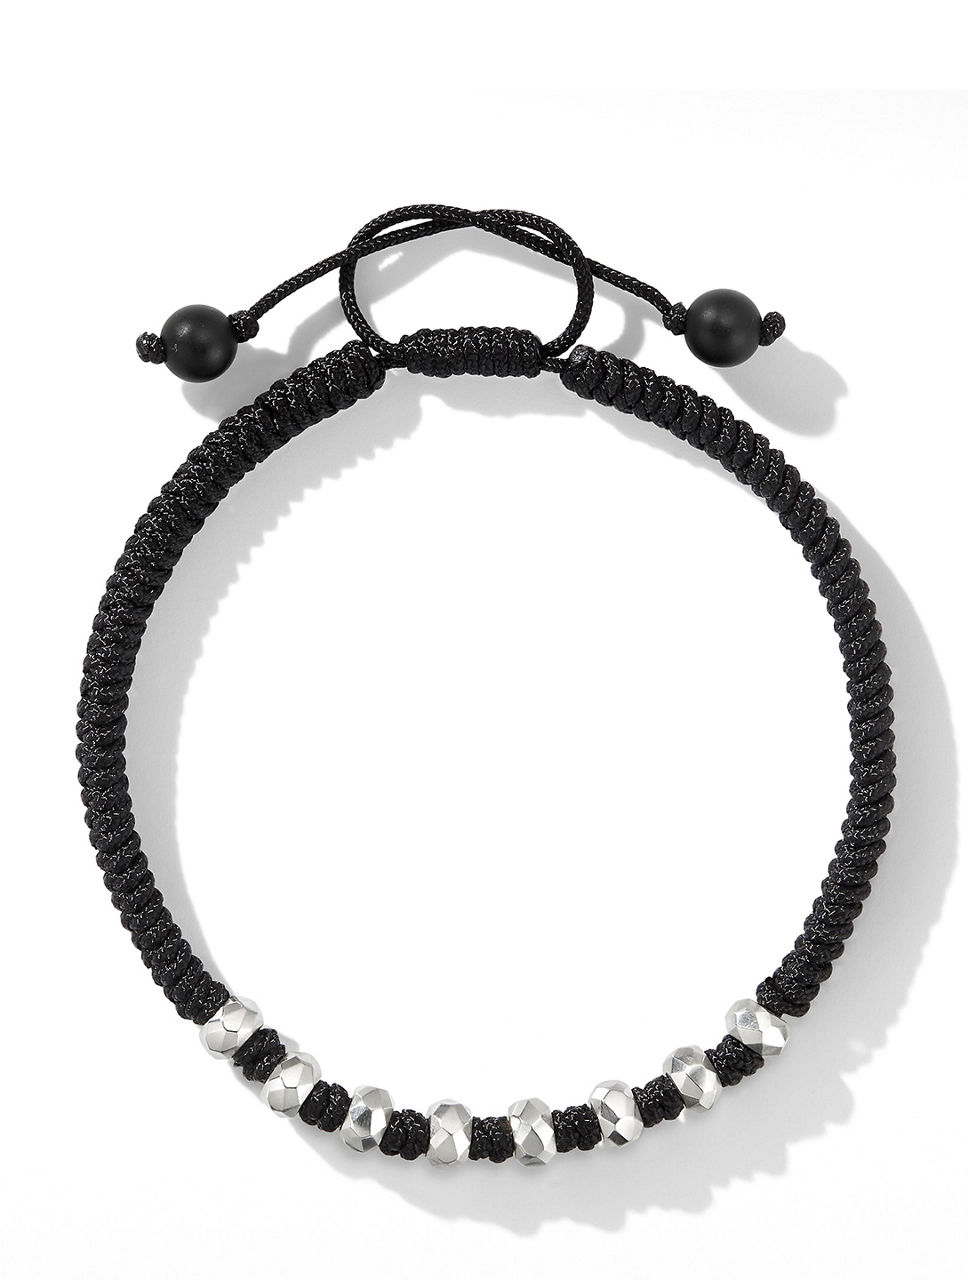 Fortune Woven Bracelet With Black Nylon And Onyx